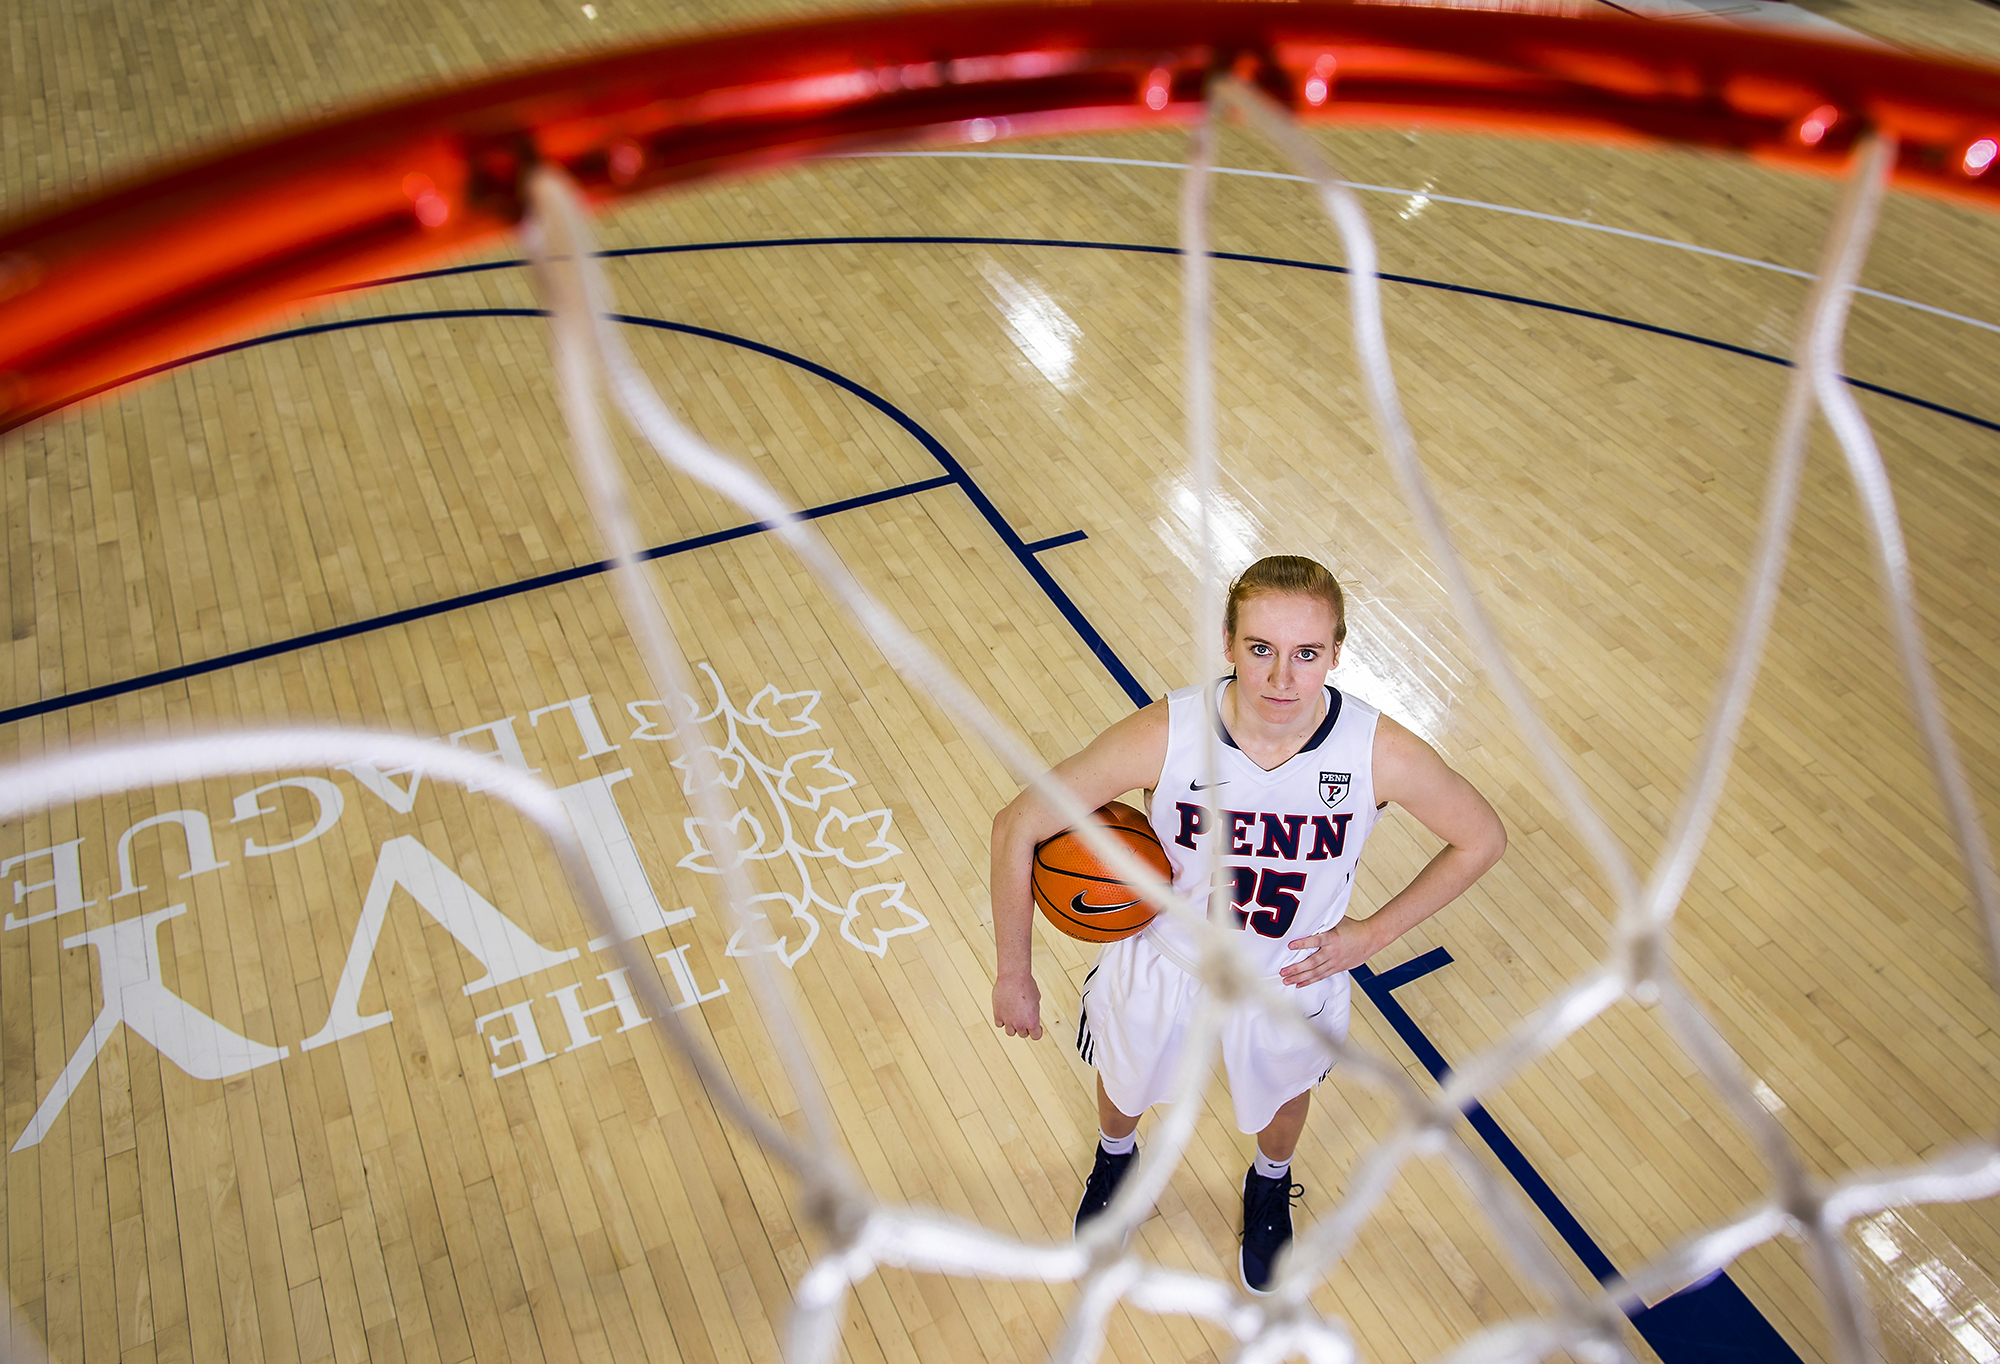 Ashley Russell of the women's basketball team poses with a ball on the Palestra court.